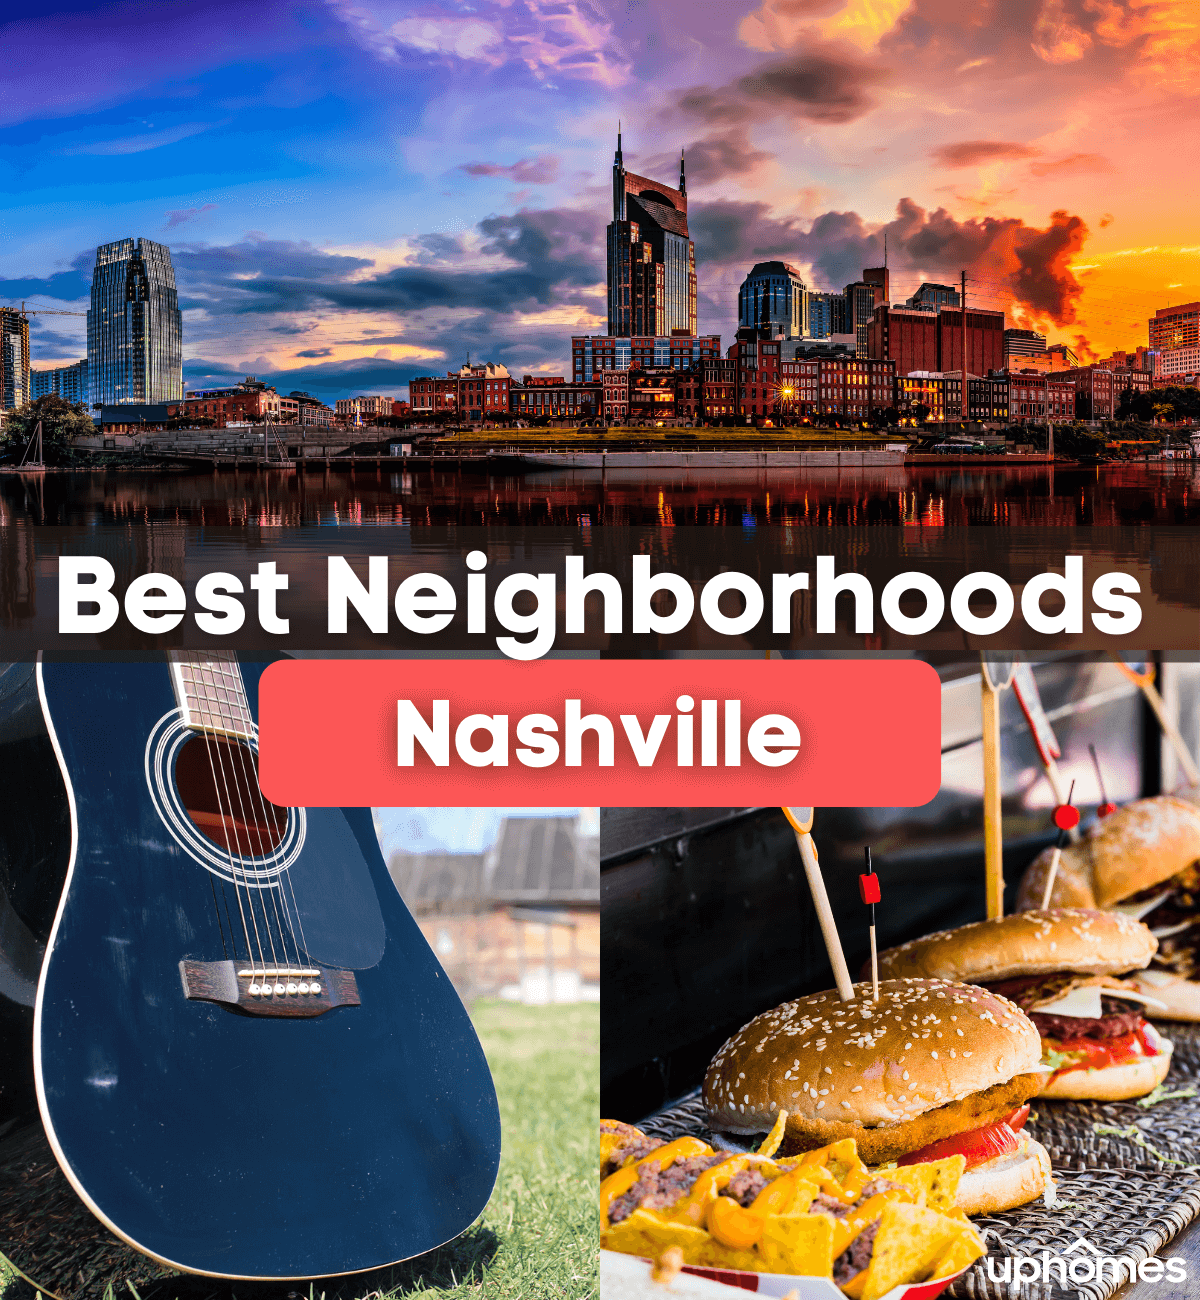 9 Best Neighborhoods in Nashville, TN - What are the top subdivisions in Nashville?